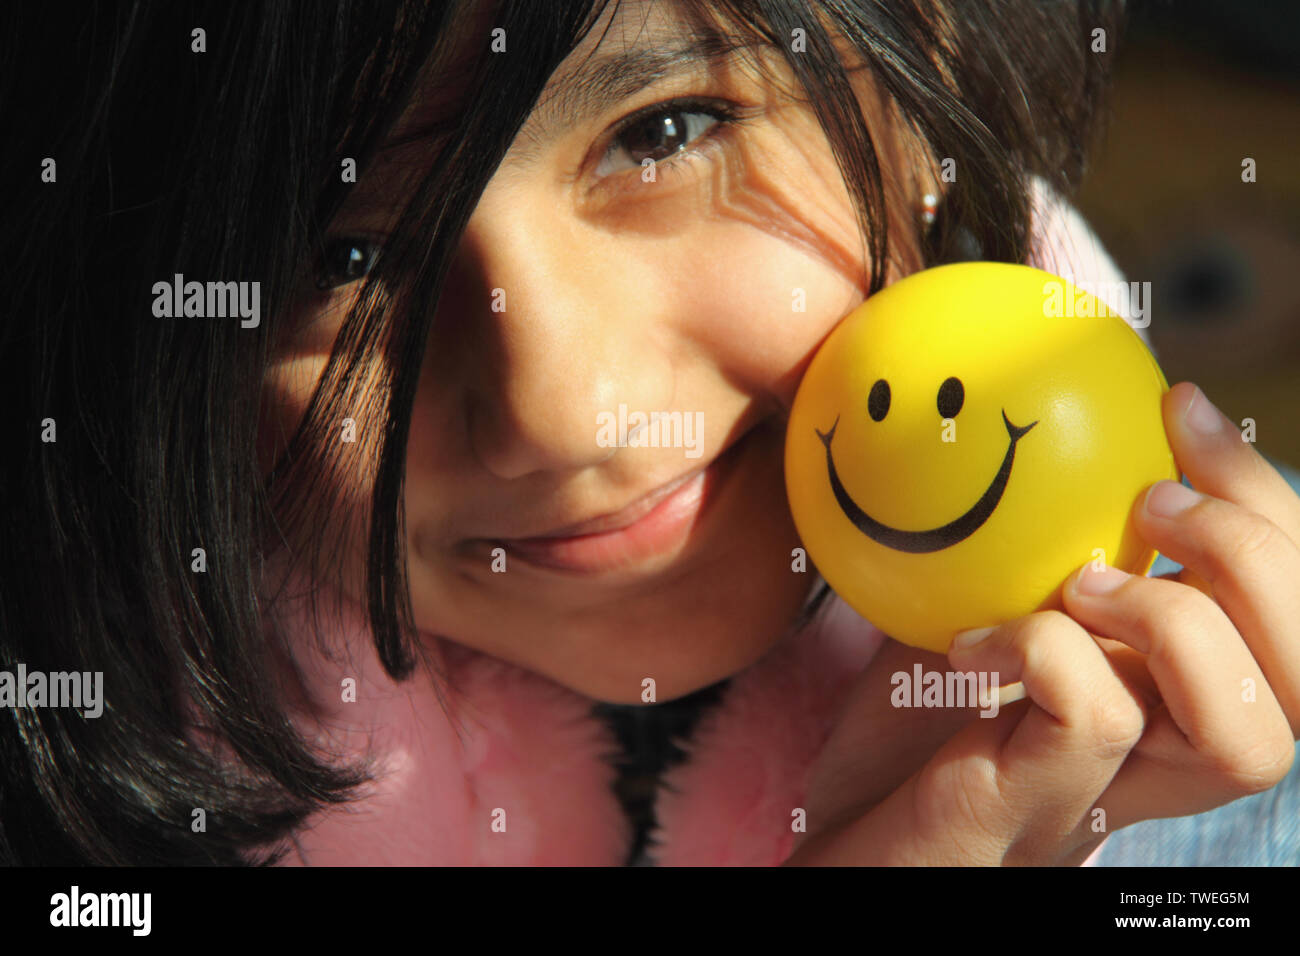 Portrait of a girl holding a ball with smiley face Stock Photo